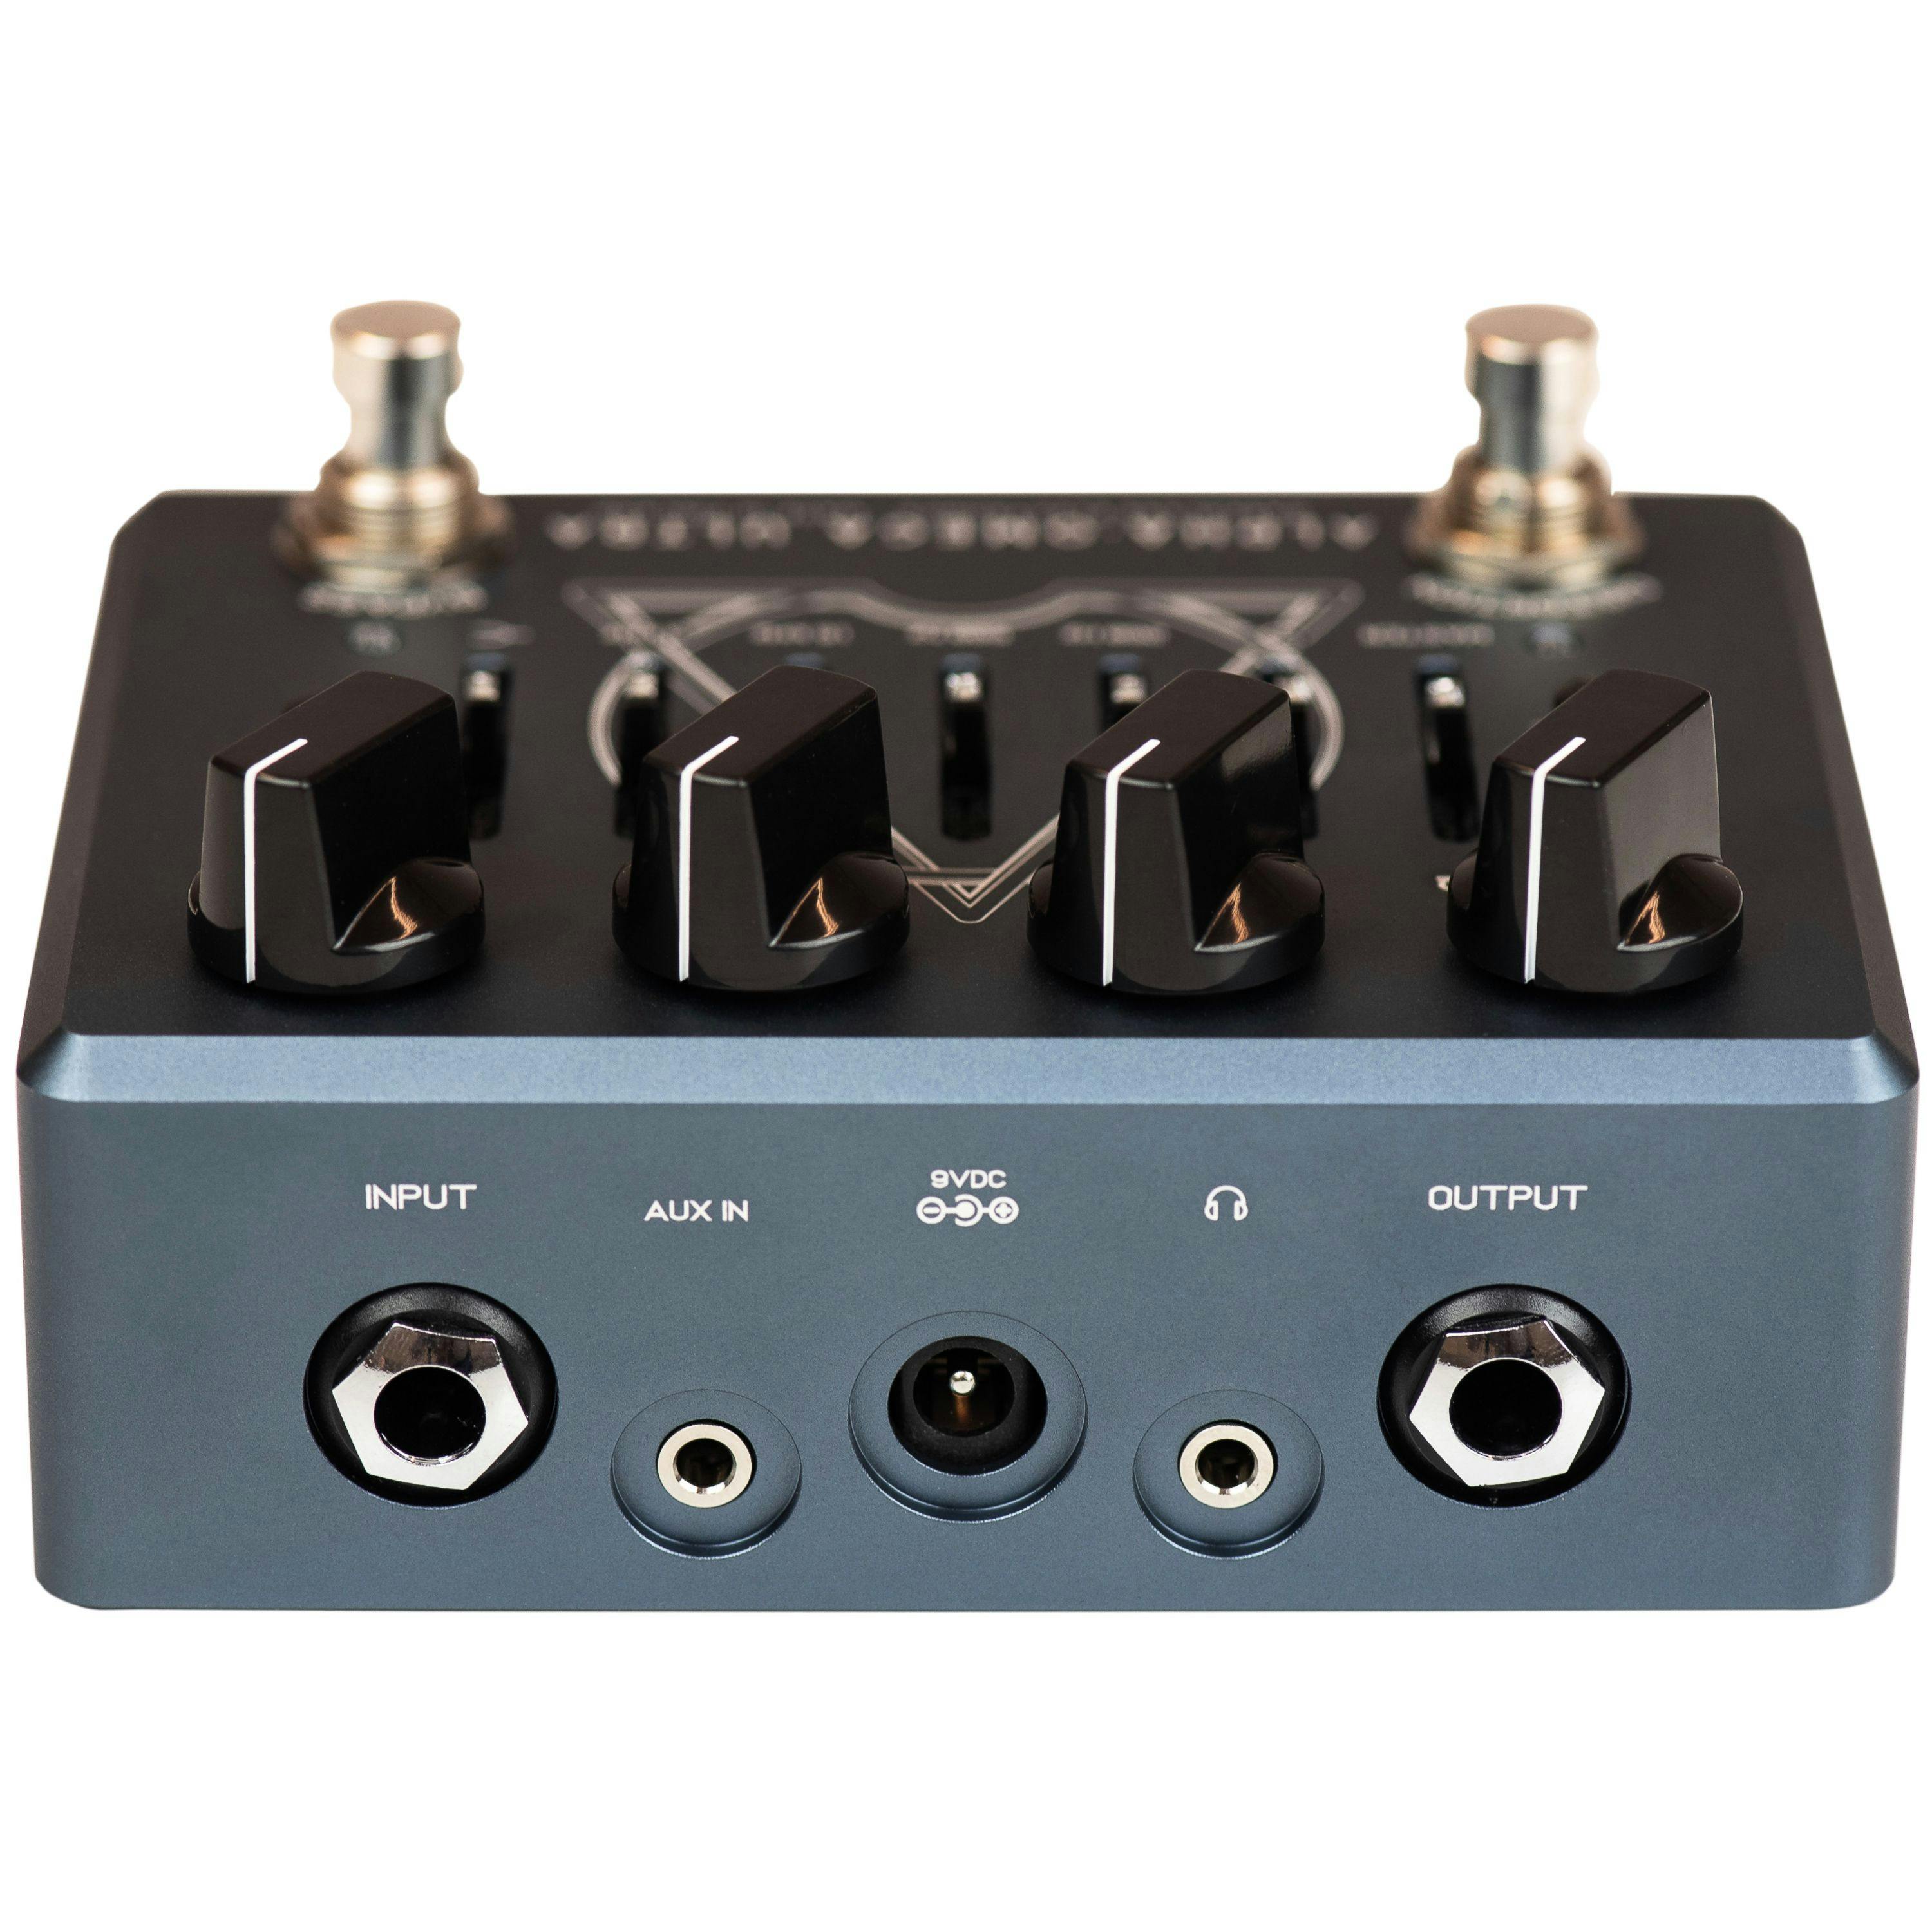 Darkglass Alpha Omega Ultra V2 Bass Preamp Pedal With Aux In